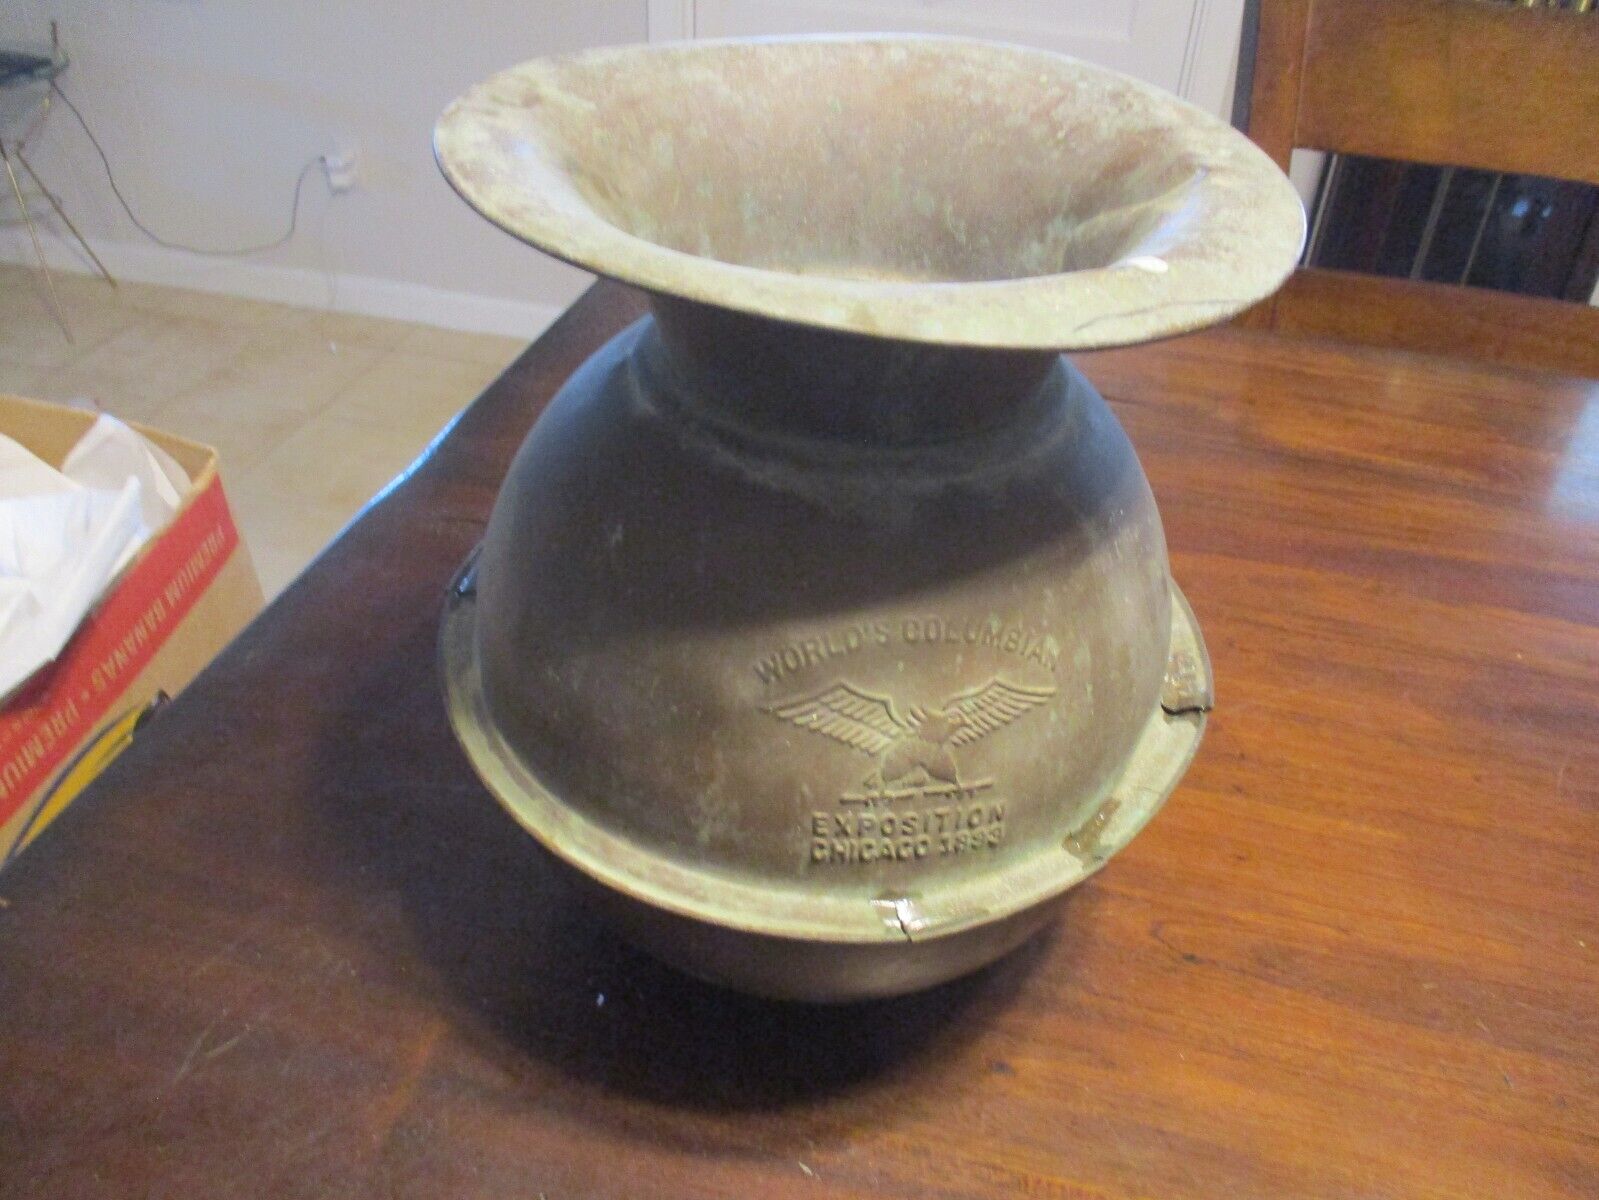 WORLD'S COLUMBIAN EXPOSITION CHICAO 1893 COPPER OR BRASS TOBACCO SPITTOON  RARE